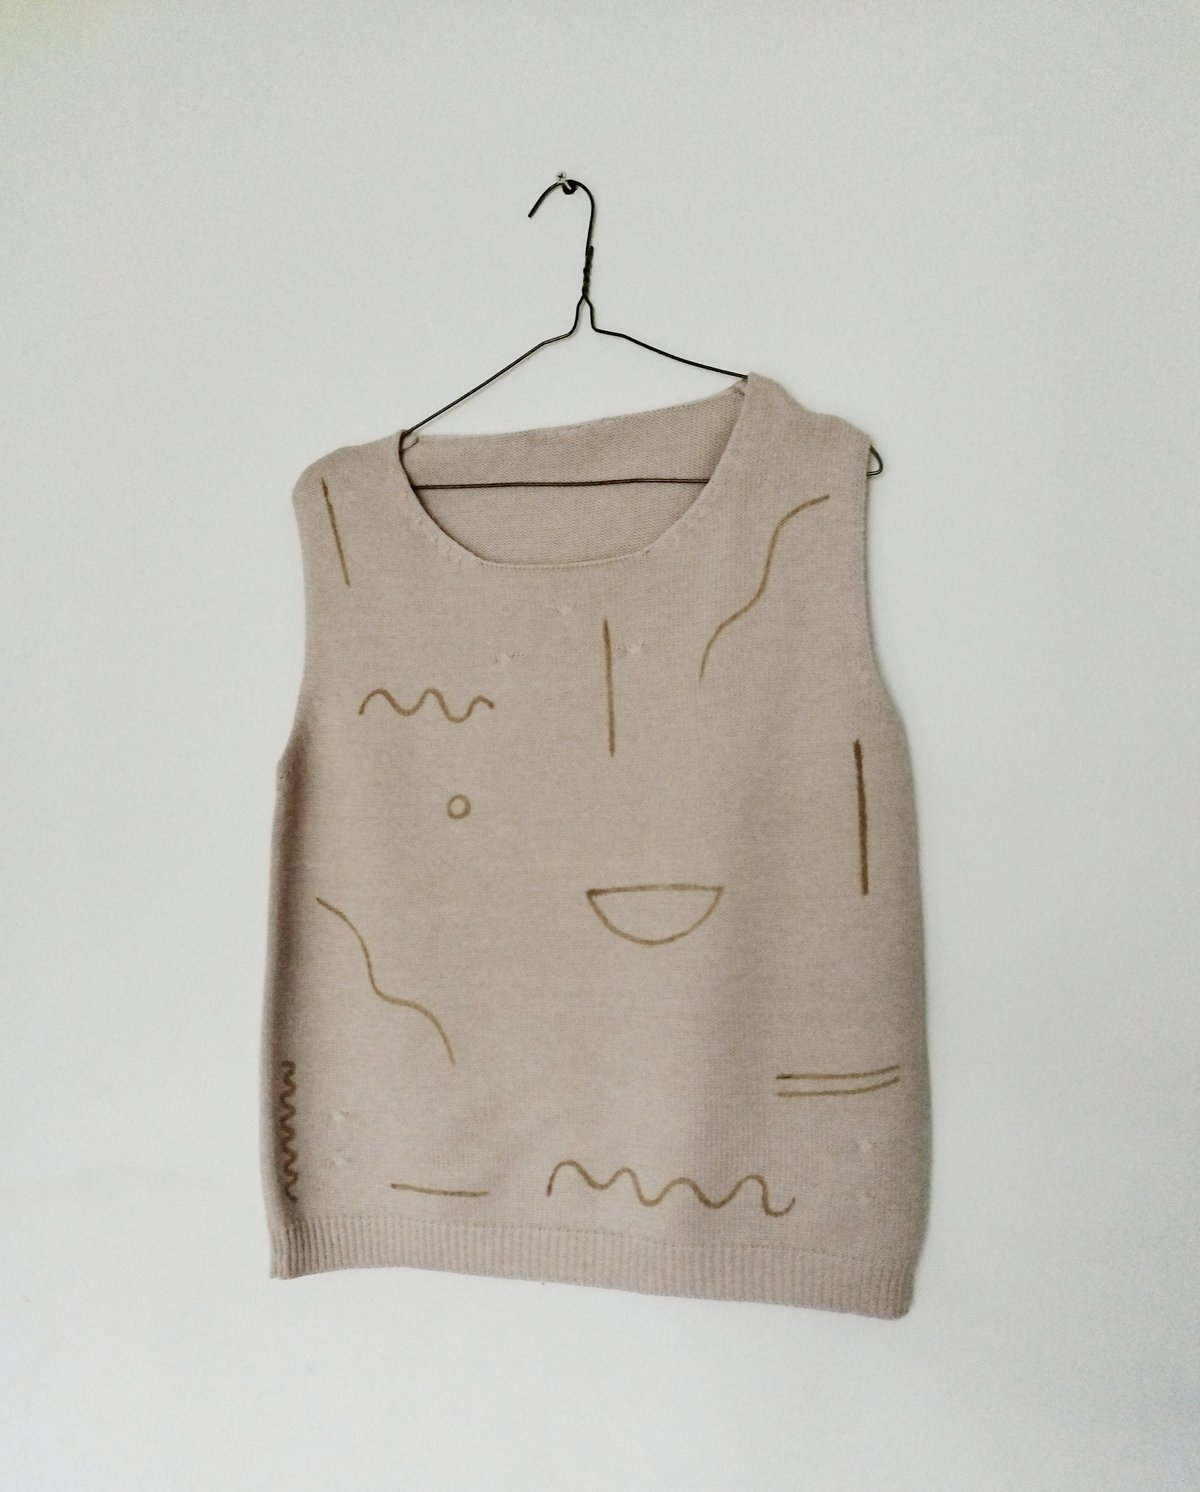 Image of knit top